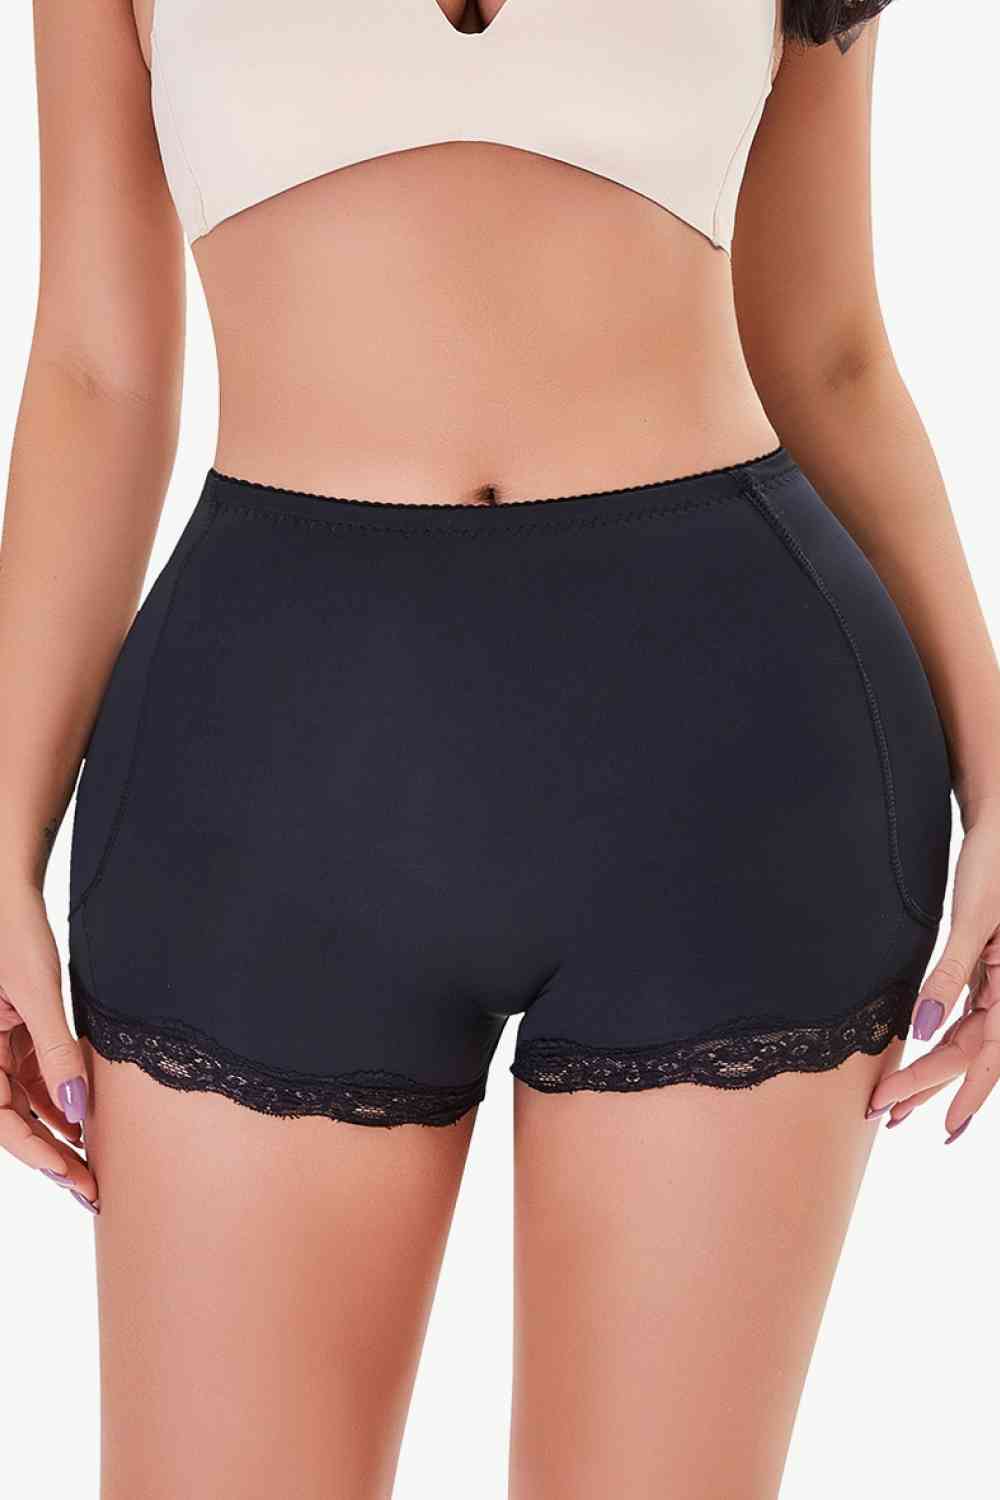 Full Size Lace Trim Shaping Shorts - intimates - Wild Willows Boutique - Massapequa, NY, affordable and fashionable clothing for women of all ages. Bottoms, tops, dresses, intimates, outerwear, sweater, shoes, accessories, jewelry, active wear, and more // Wild Willow Boutique.